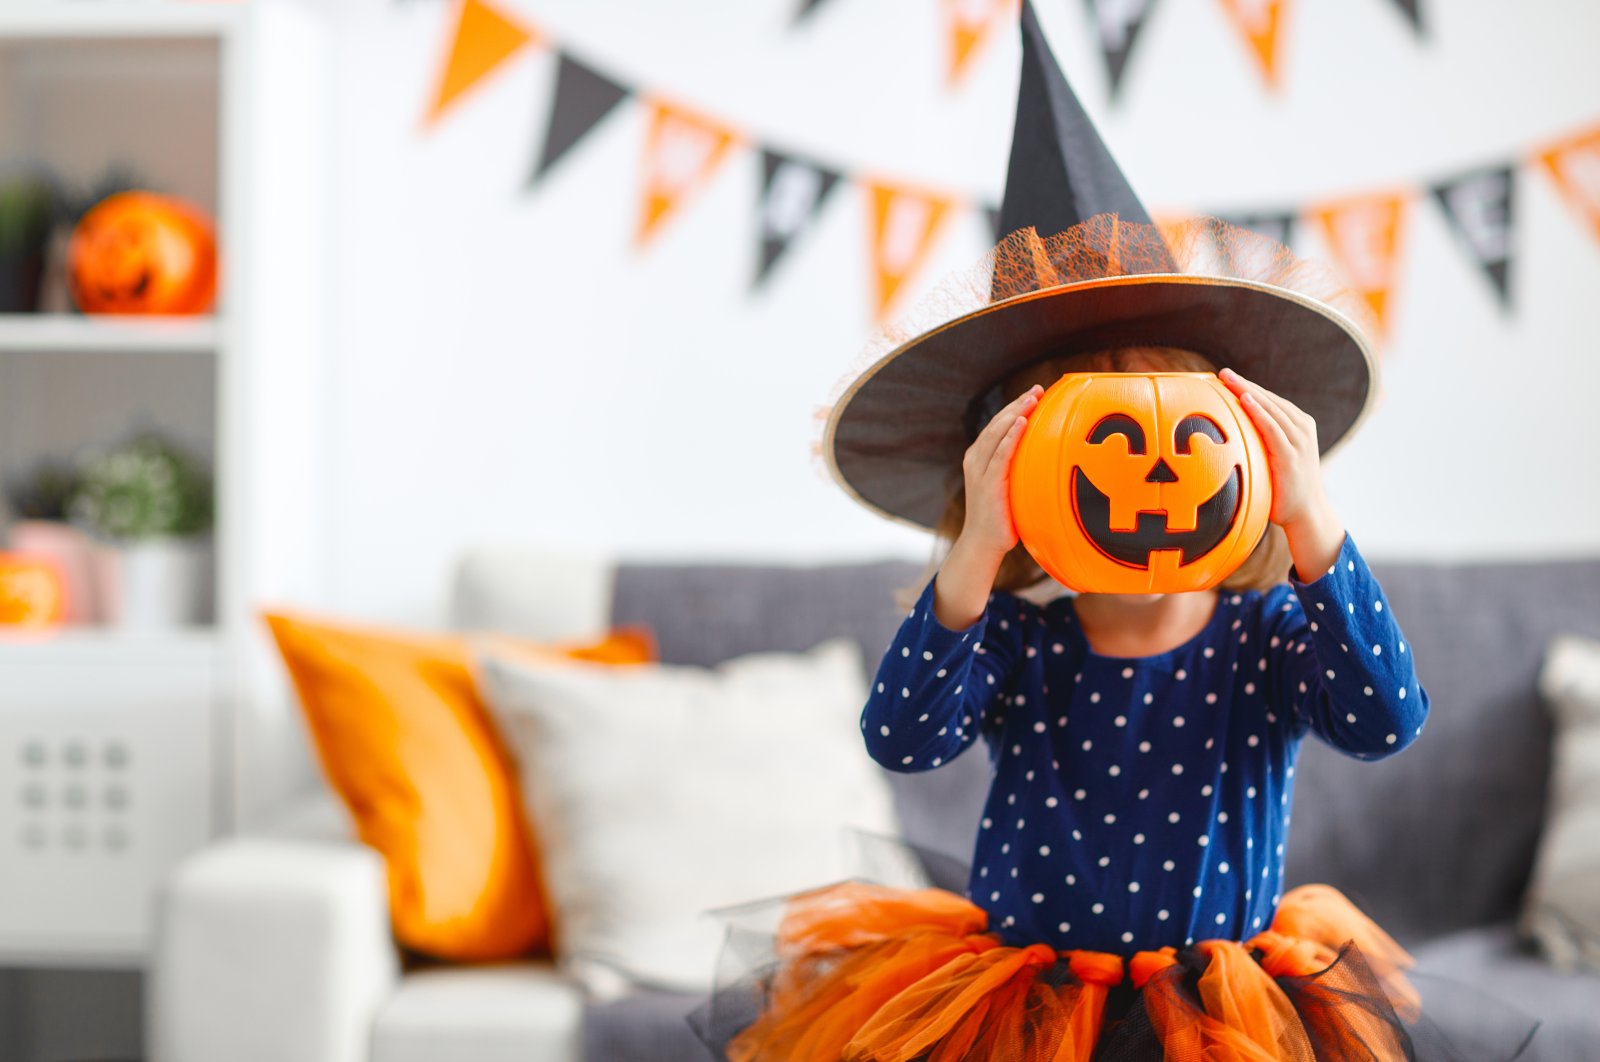 Halloween is celebrated in many countries on Oct. 31. (Shutterstock Photo)